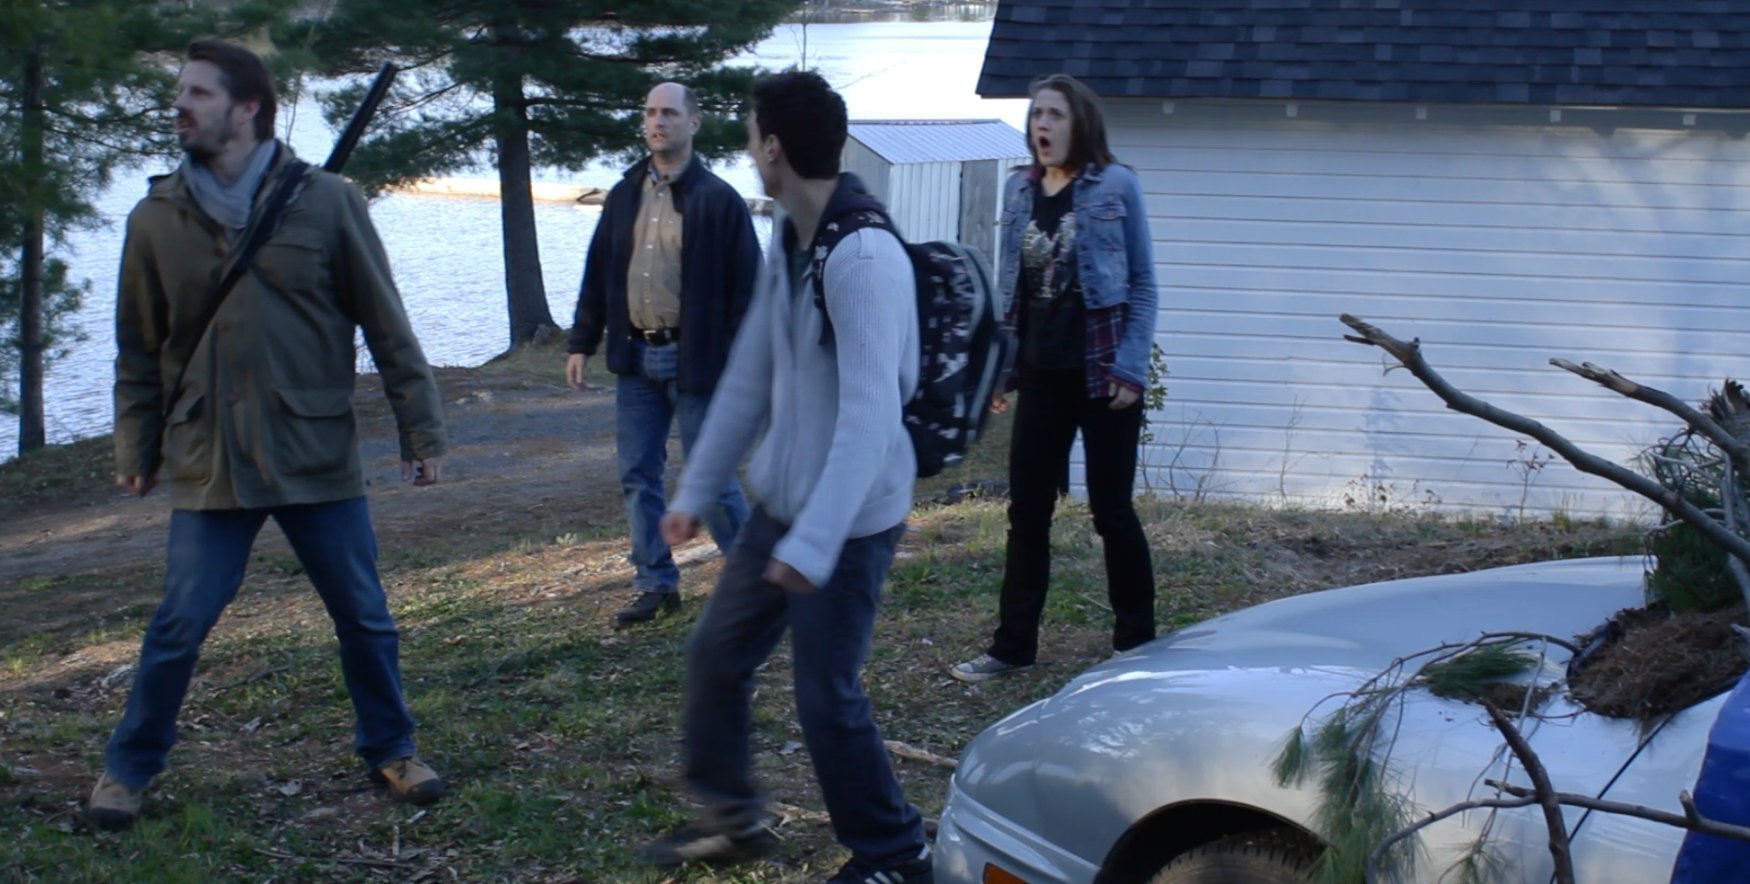 Les, Charles, Dan and Cheyna are confronted by the entity.